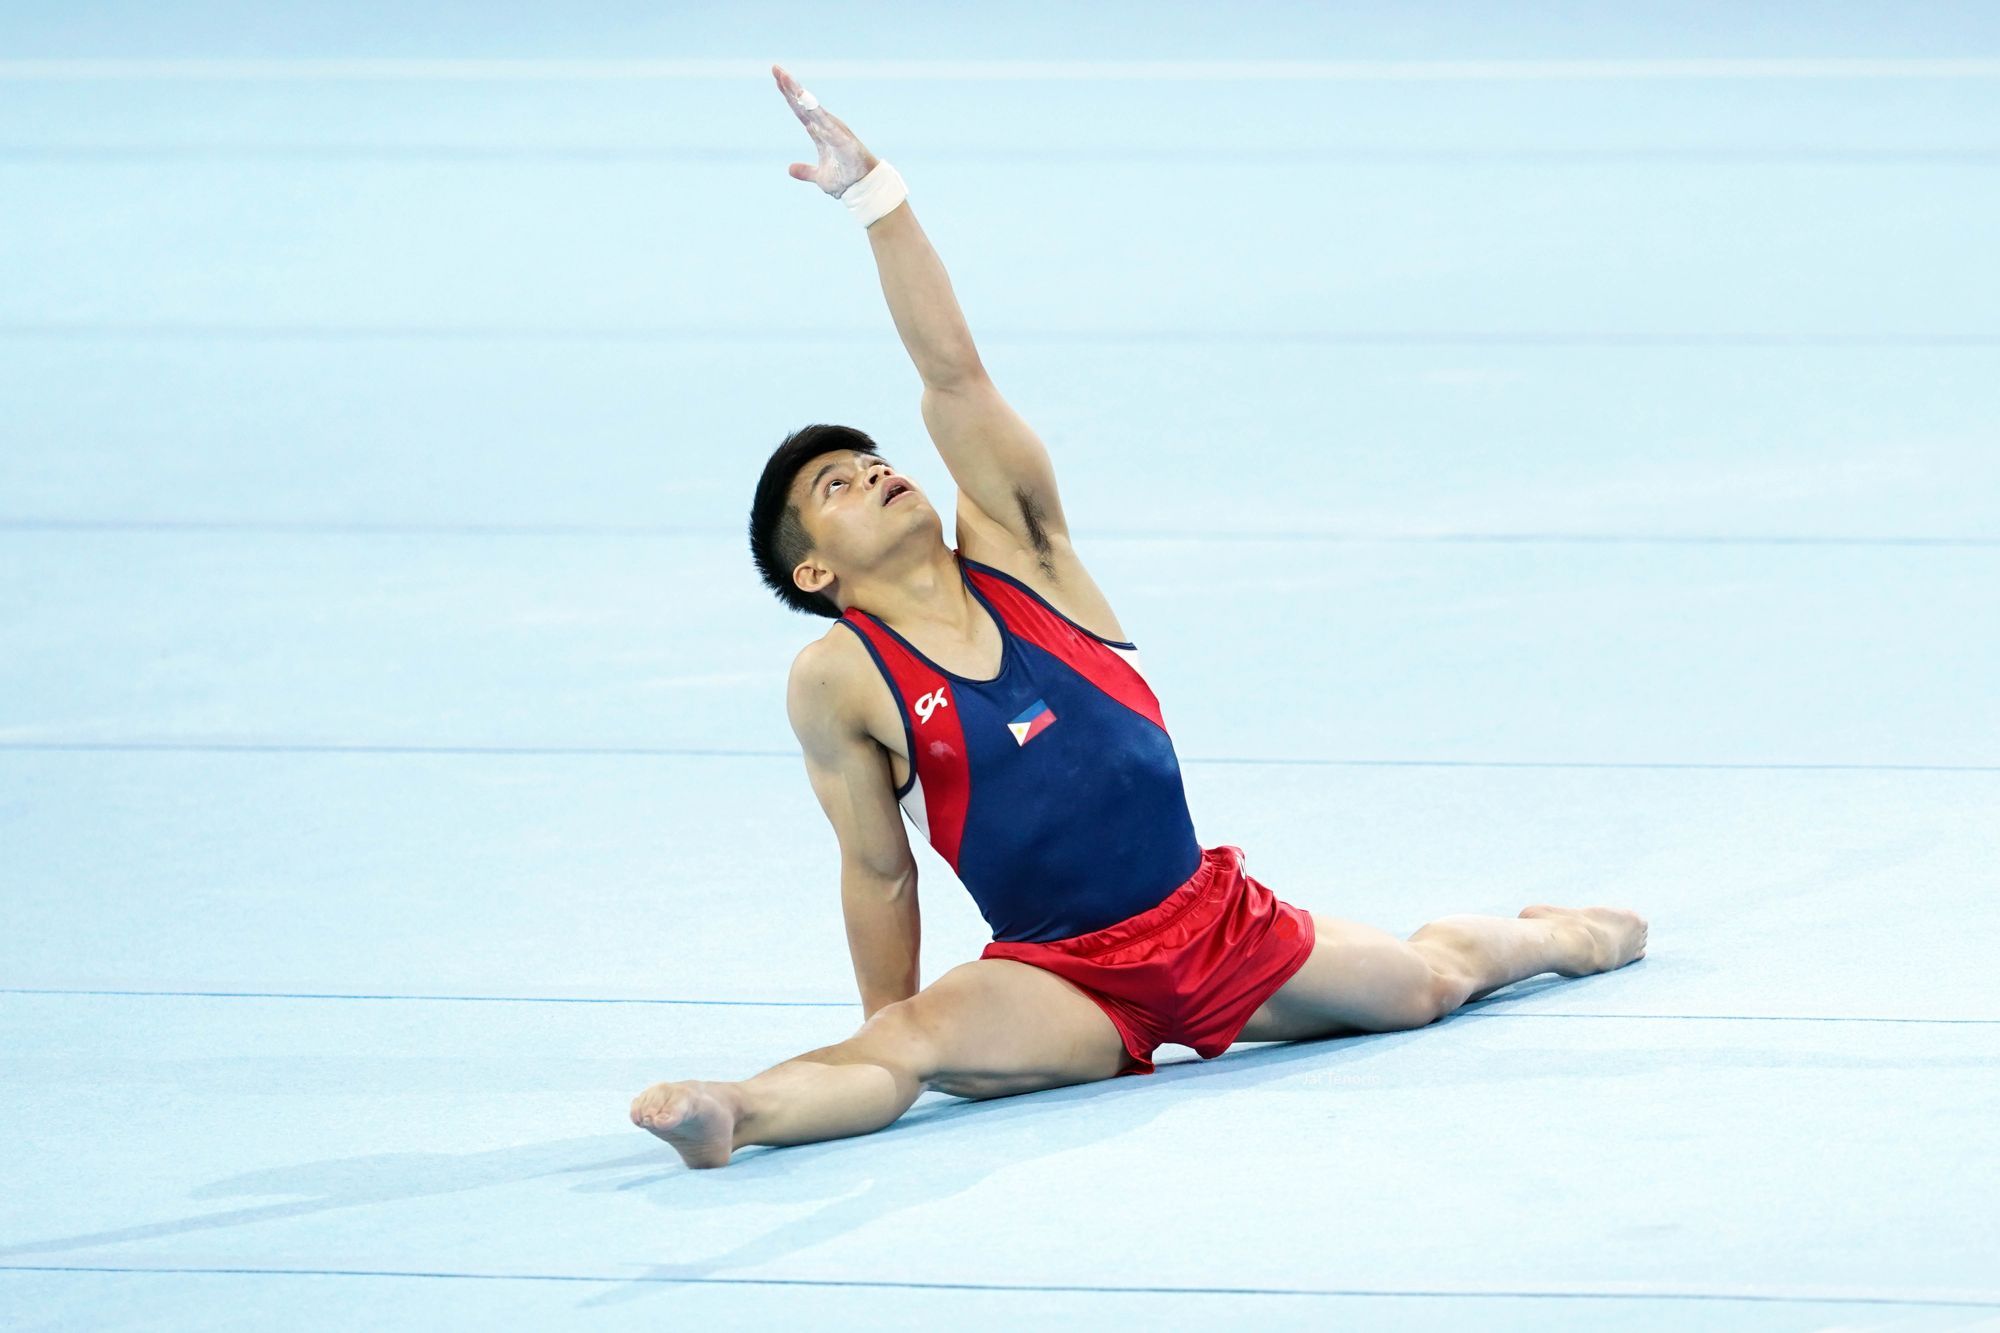 Young Filipino Gymnast Carlos Yulo Is The Philippines' First World Champion